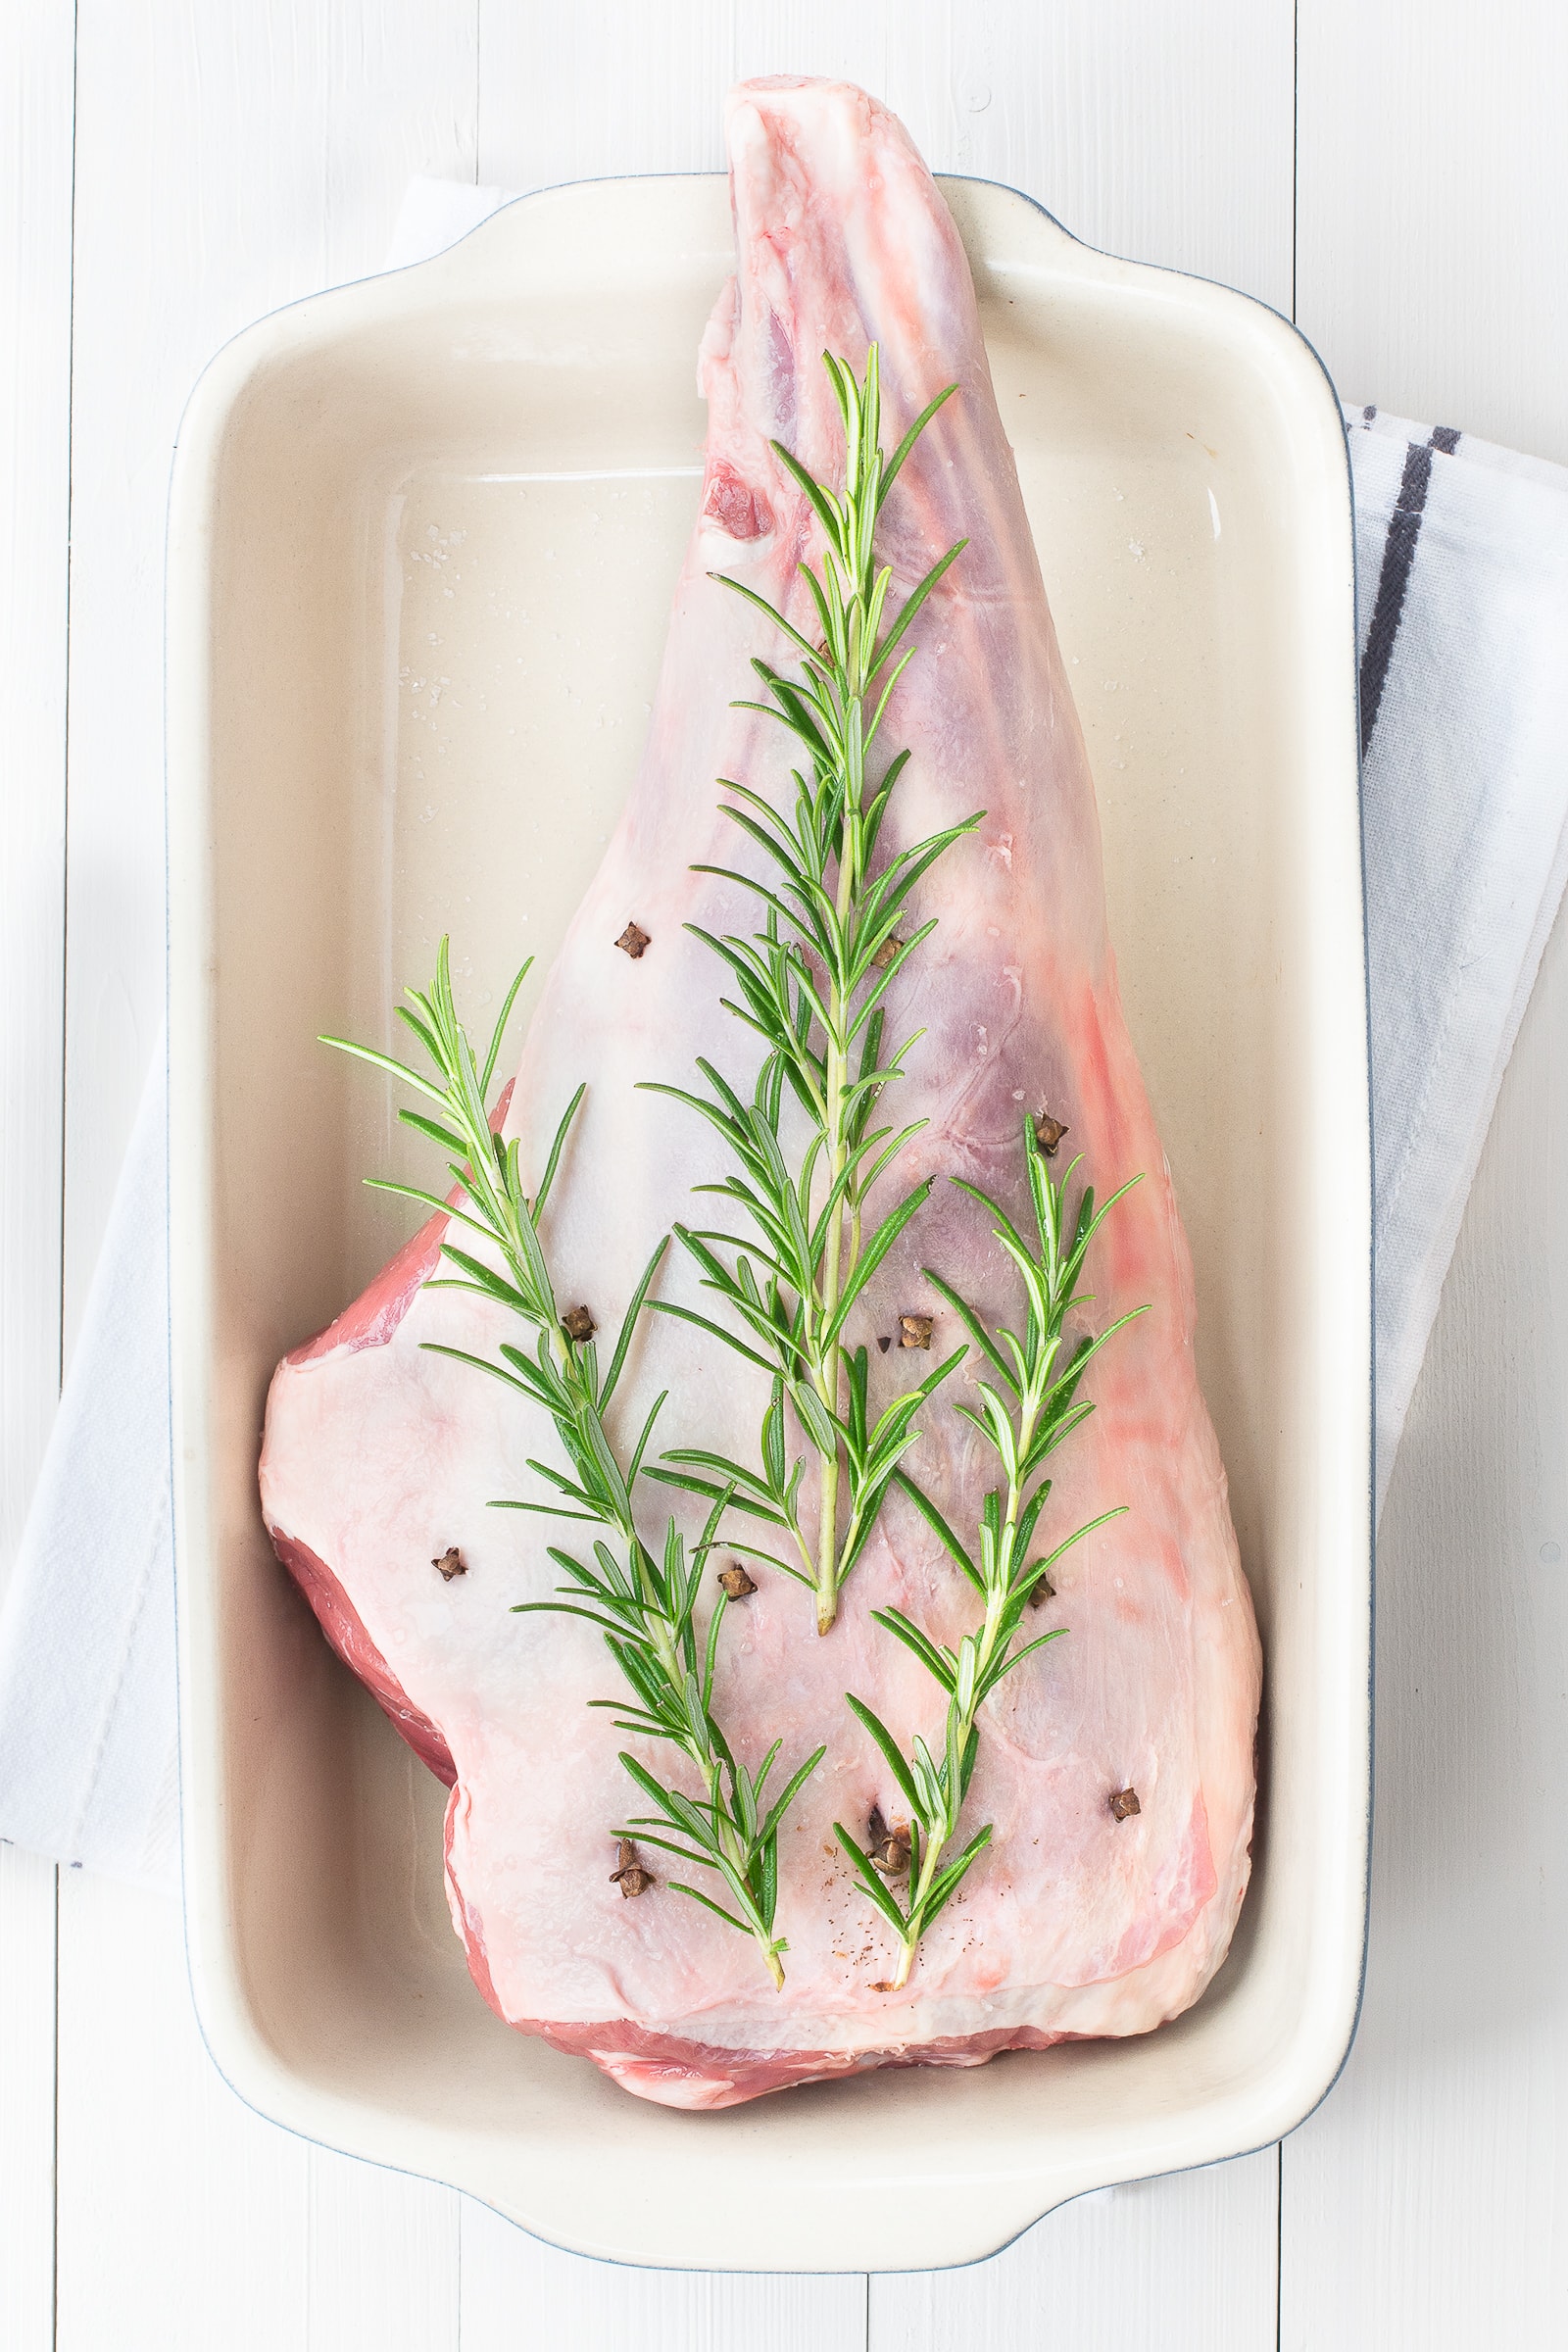 My festive roast leg of lamb flavoured with rosemary, cloves, orange and cranberries makes a fantastic alternative to turkey on Christmas day or to feed your family and friends over the festive period.